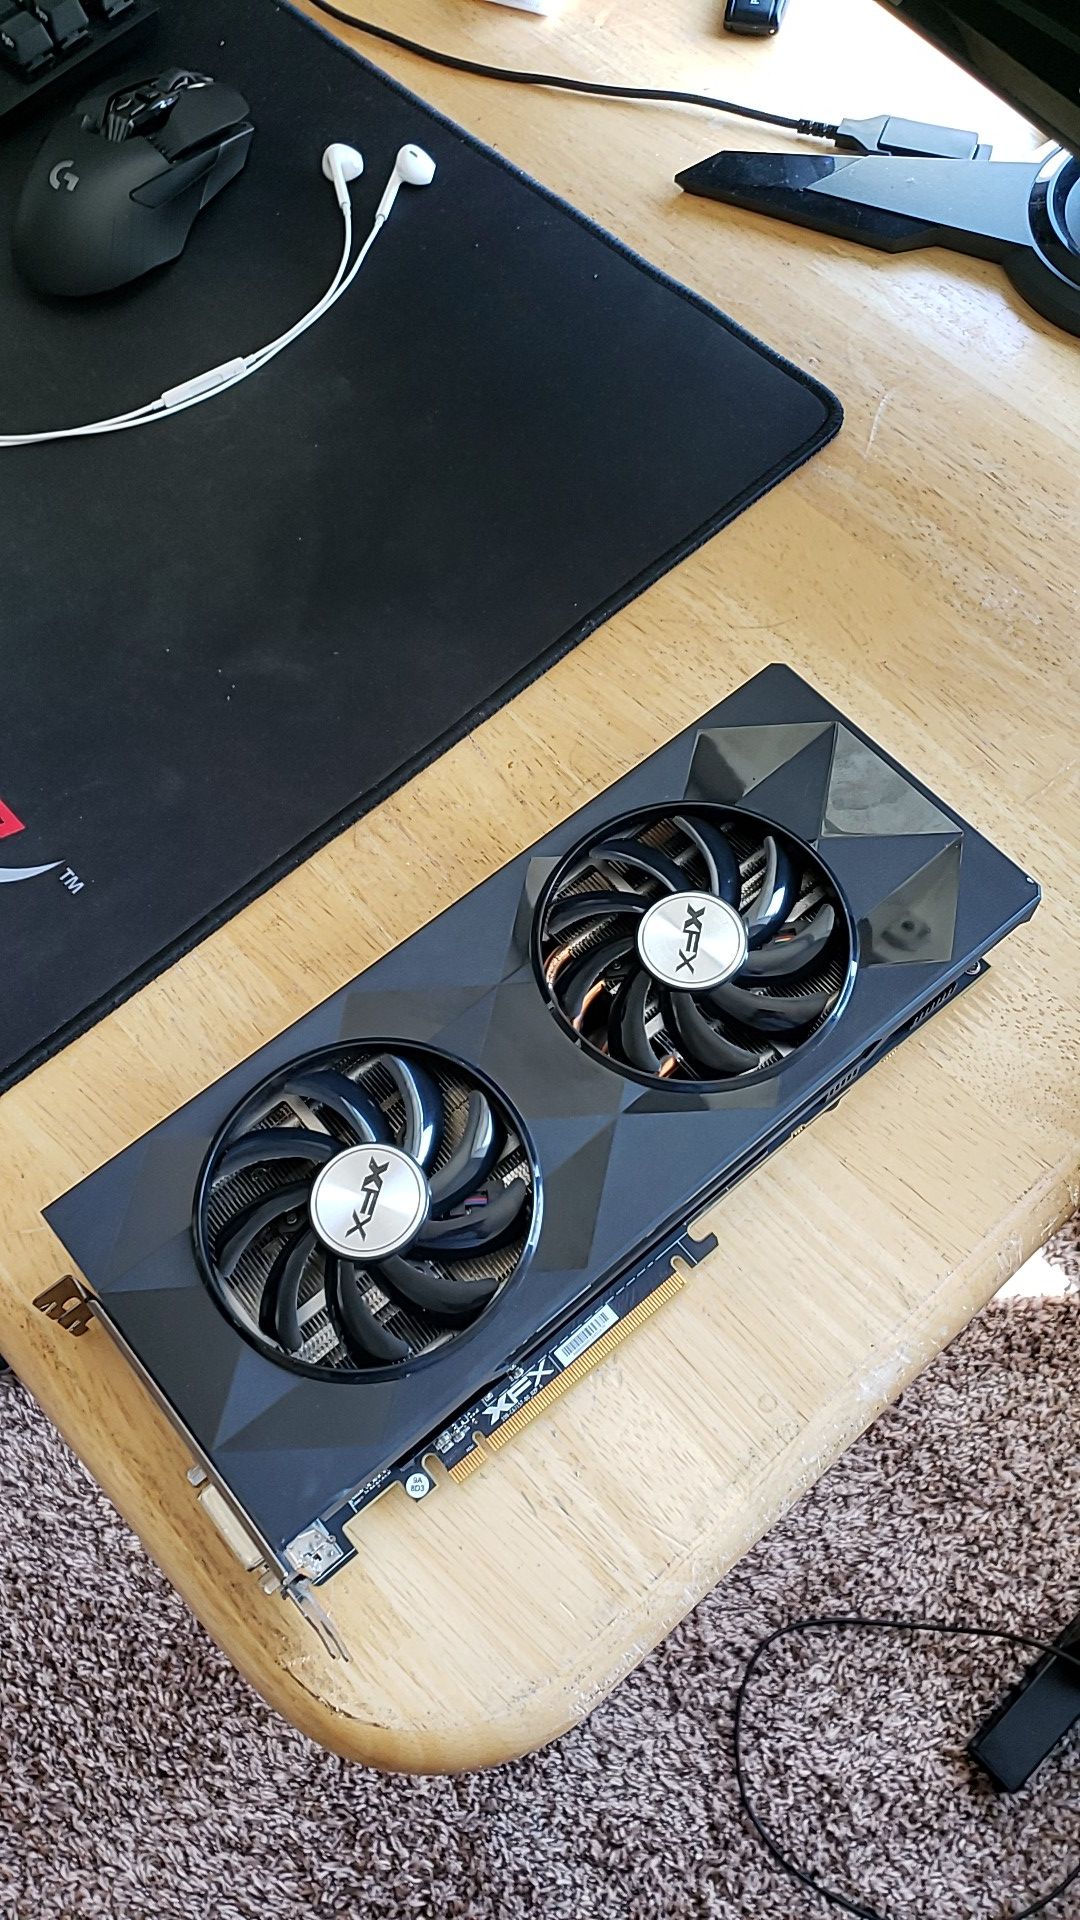 XFX R9 390 Graphics Card